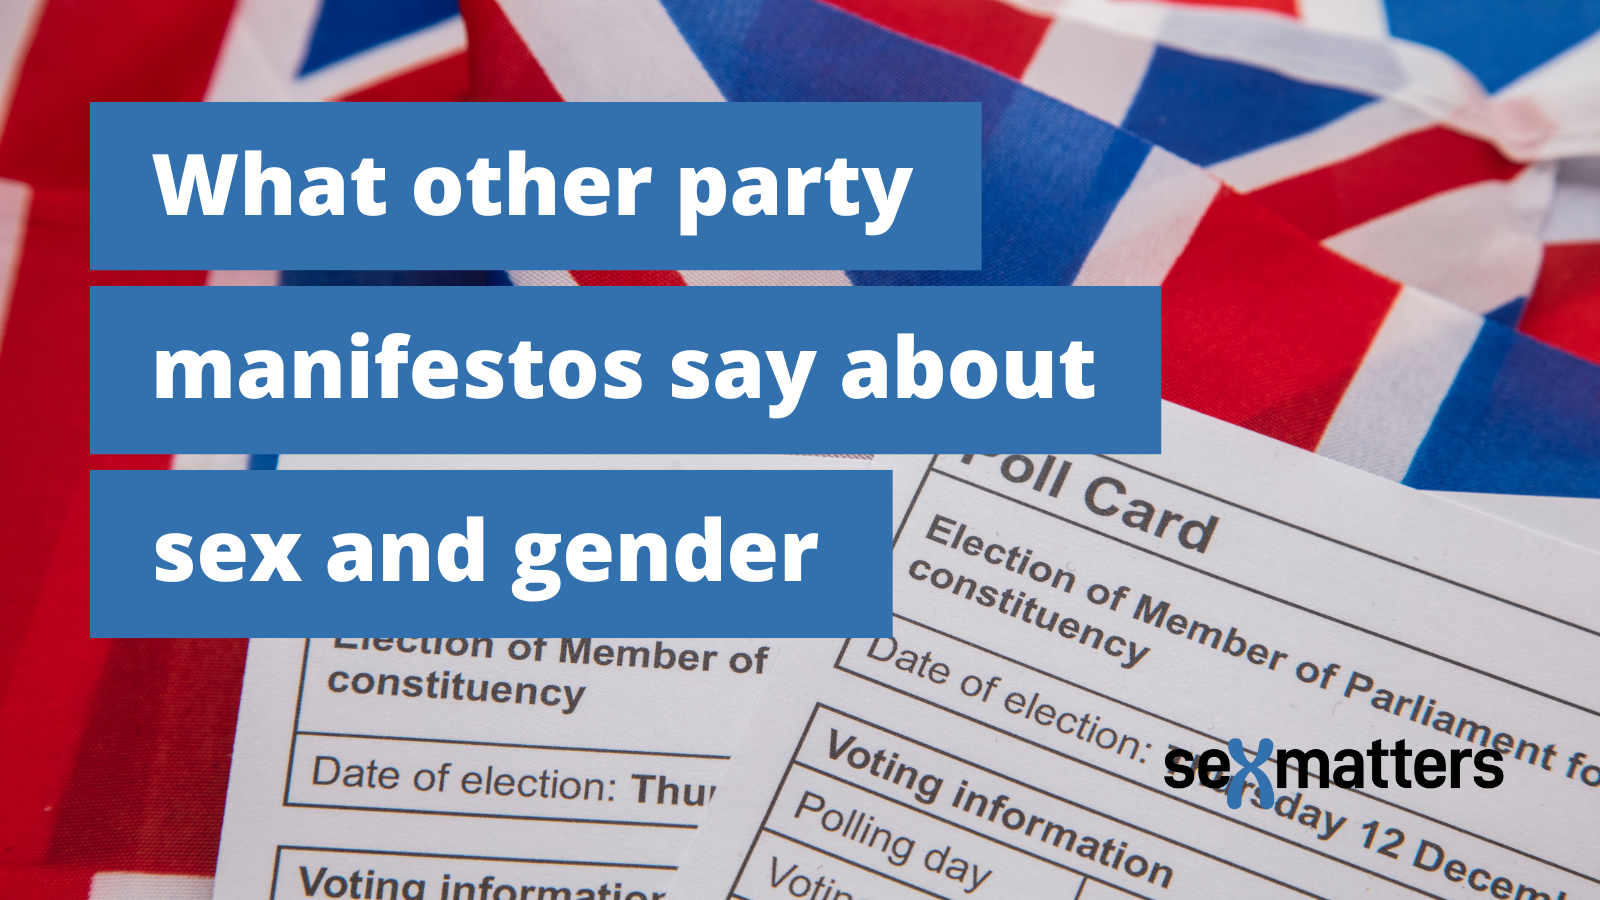 What other party manifestos say about sex and gender